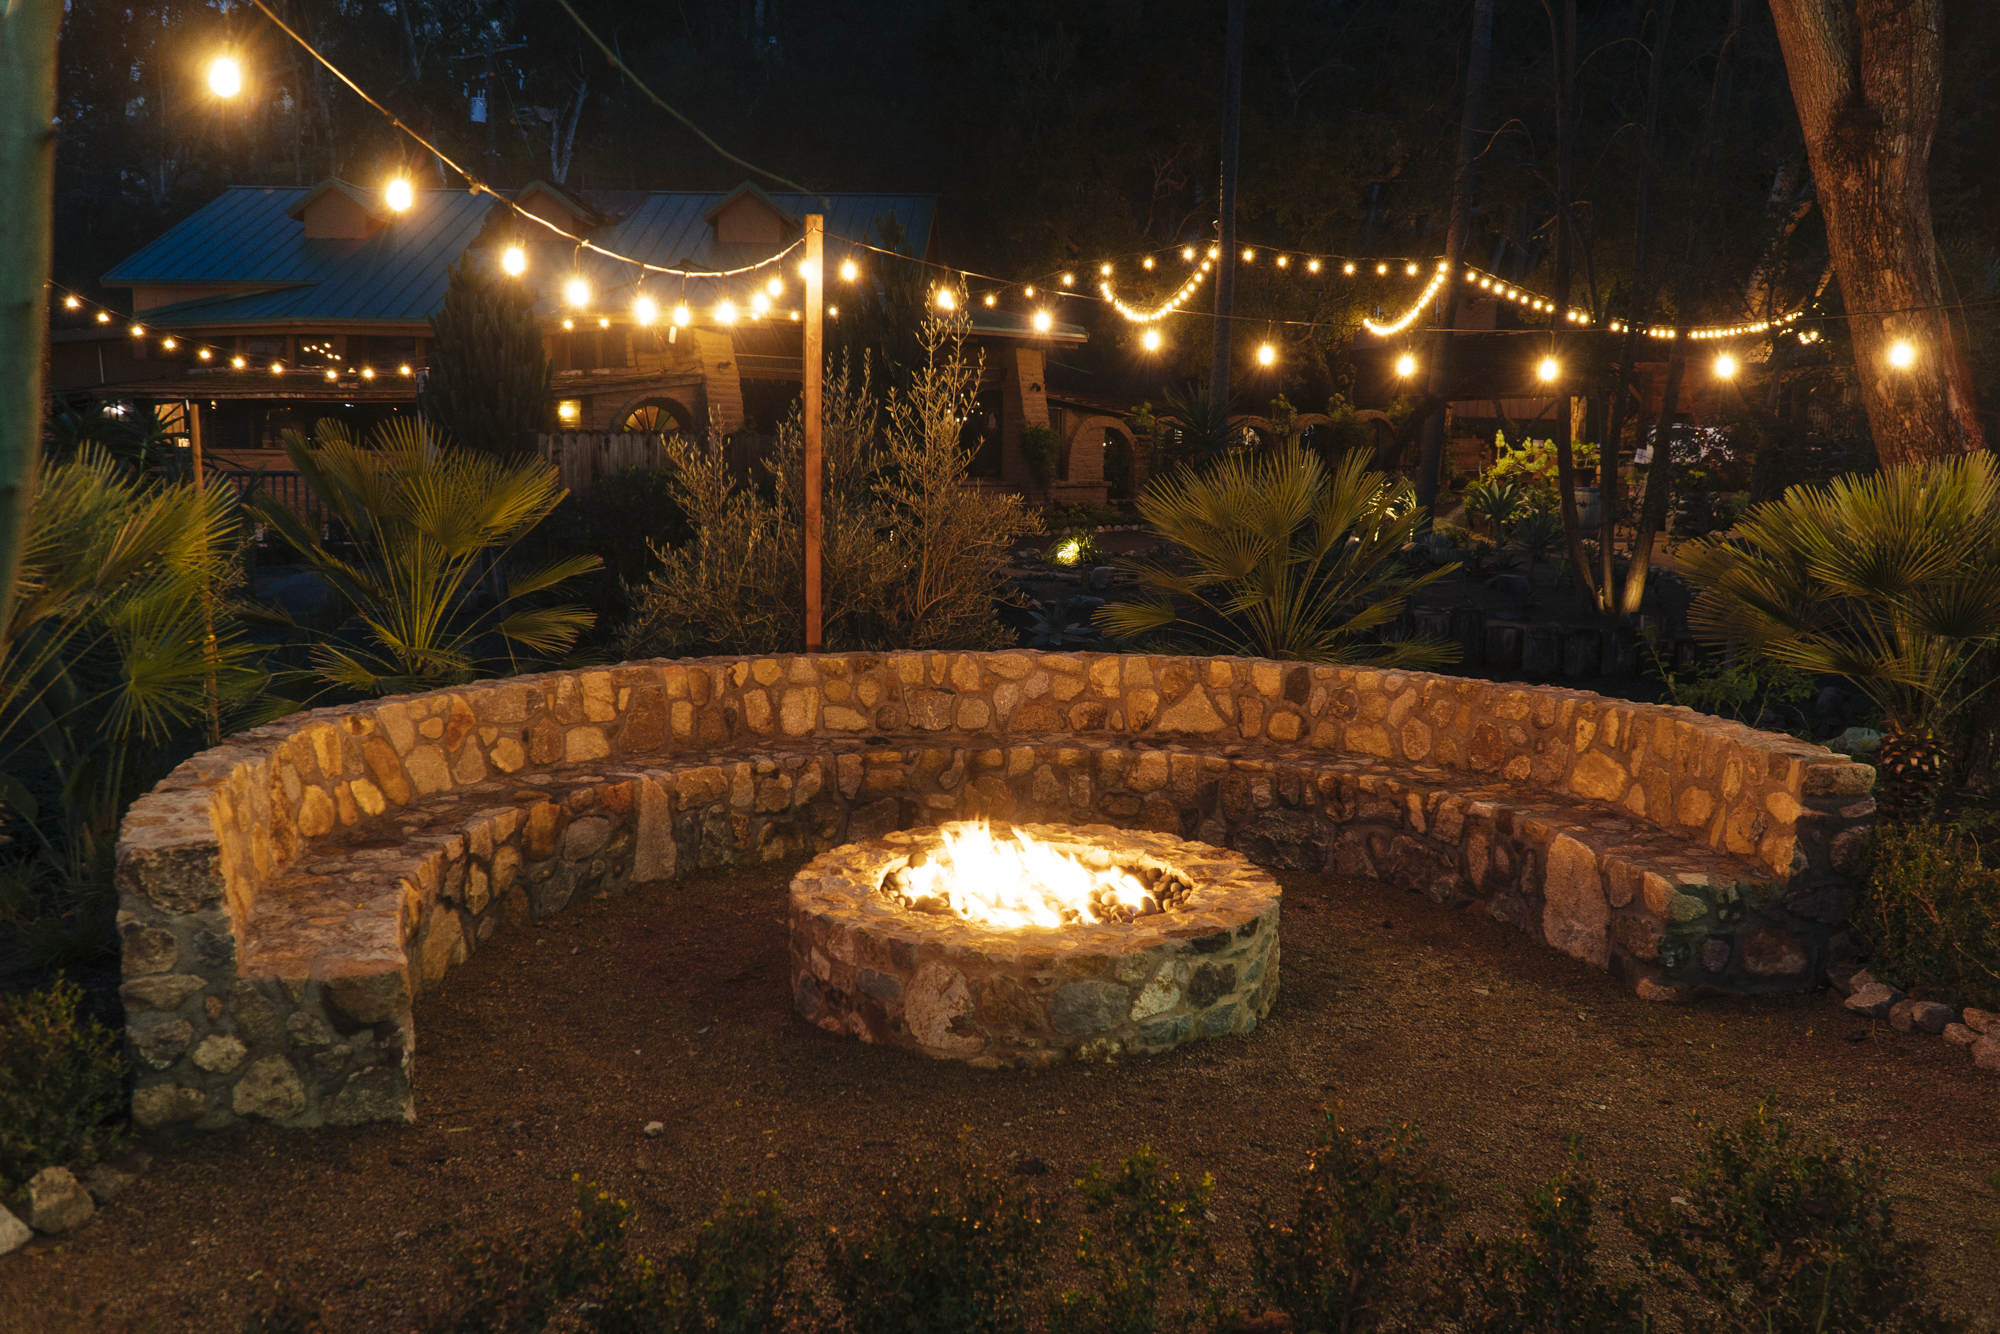 Lit fire pit at night next to sitting wall